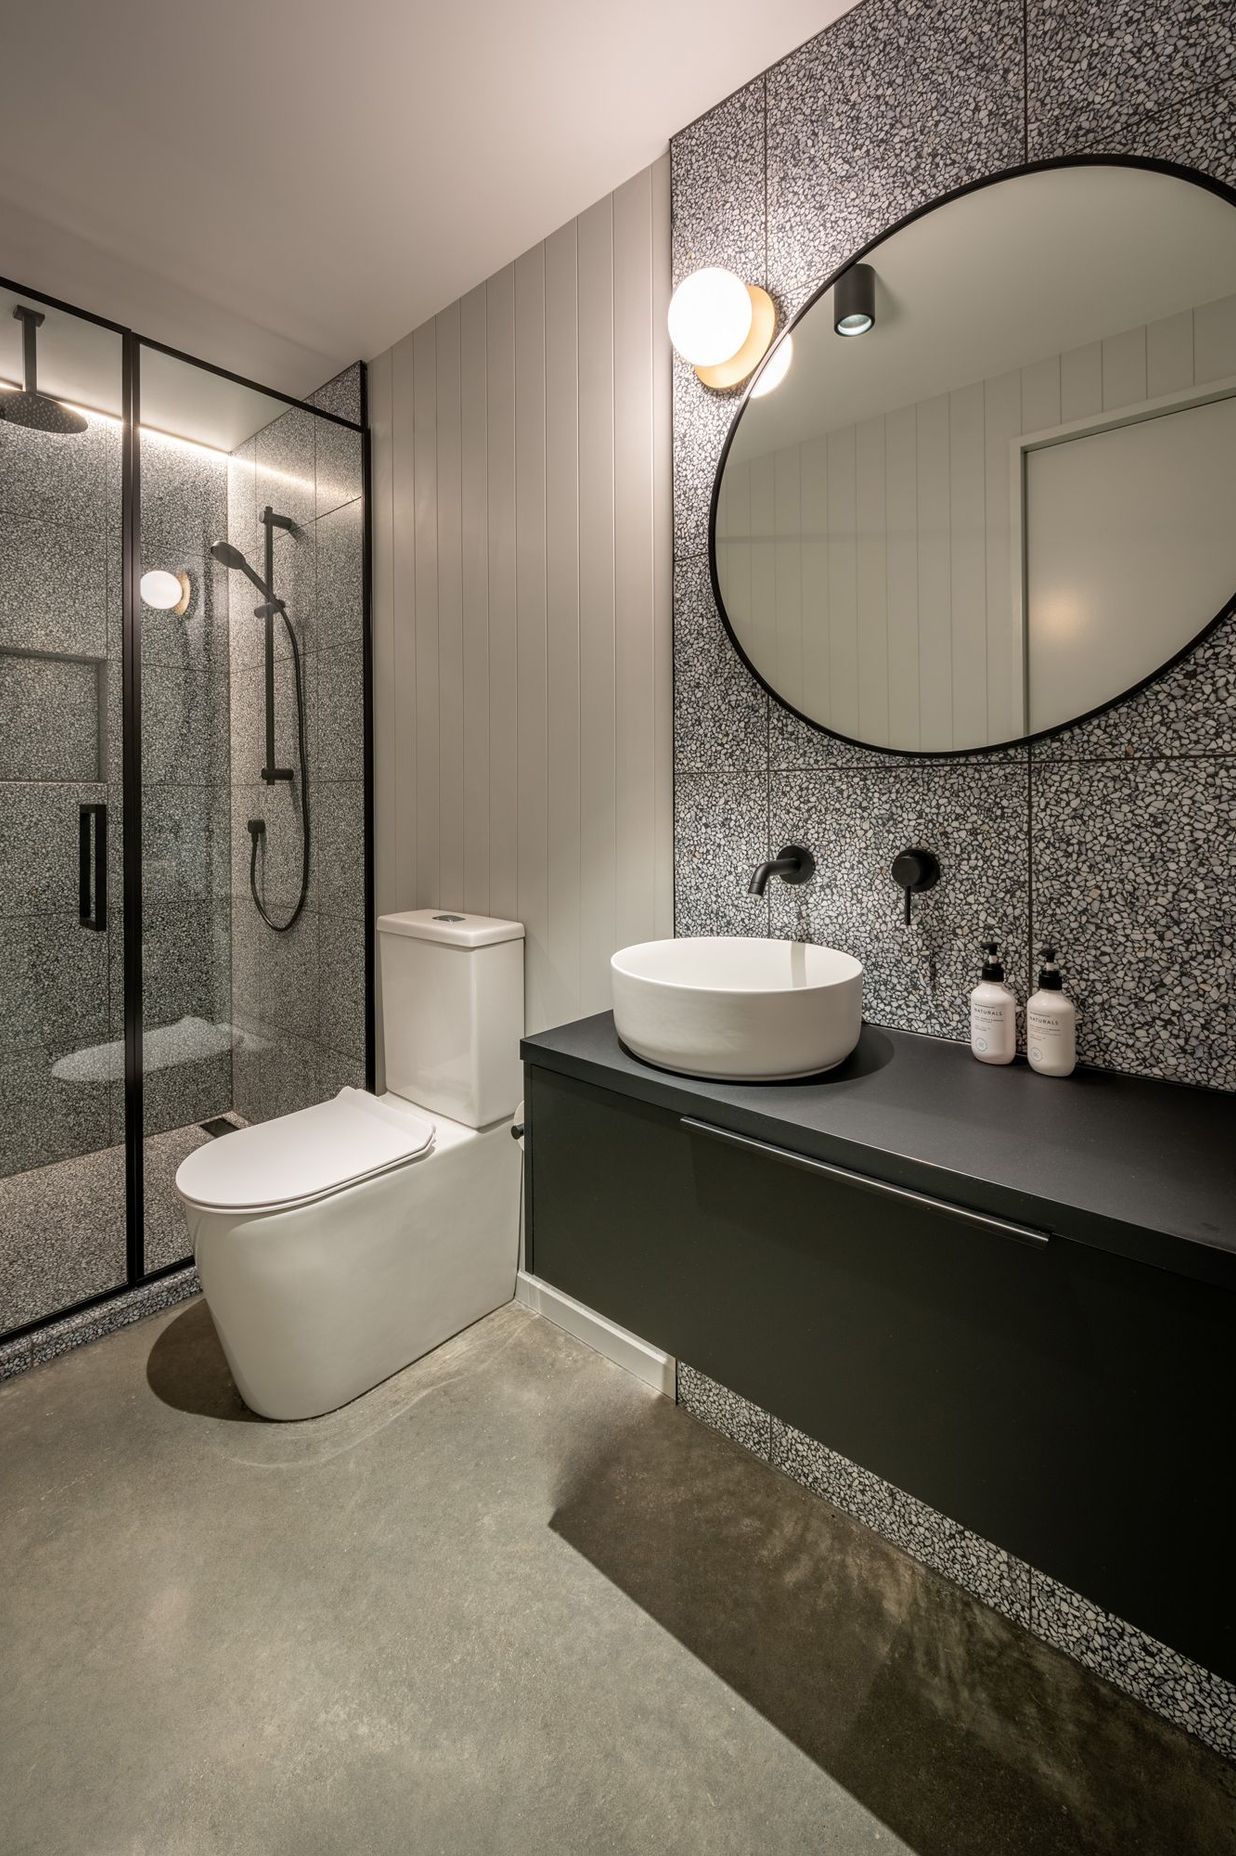 A third bathroom for guests features a concrete floor and black steel-framed shower.